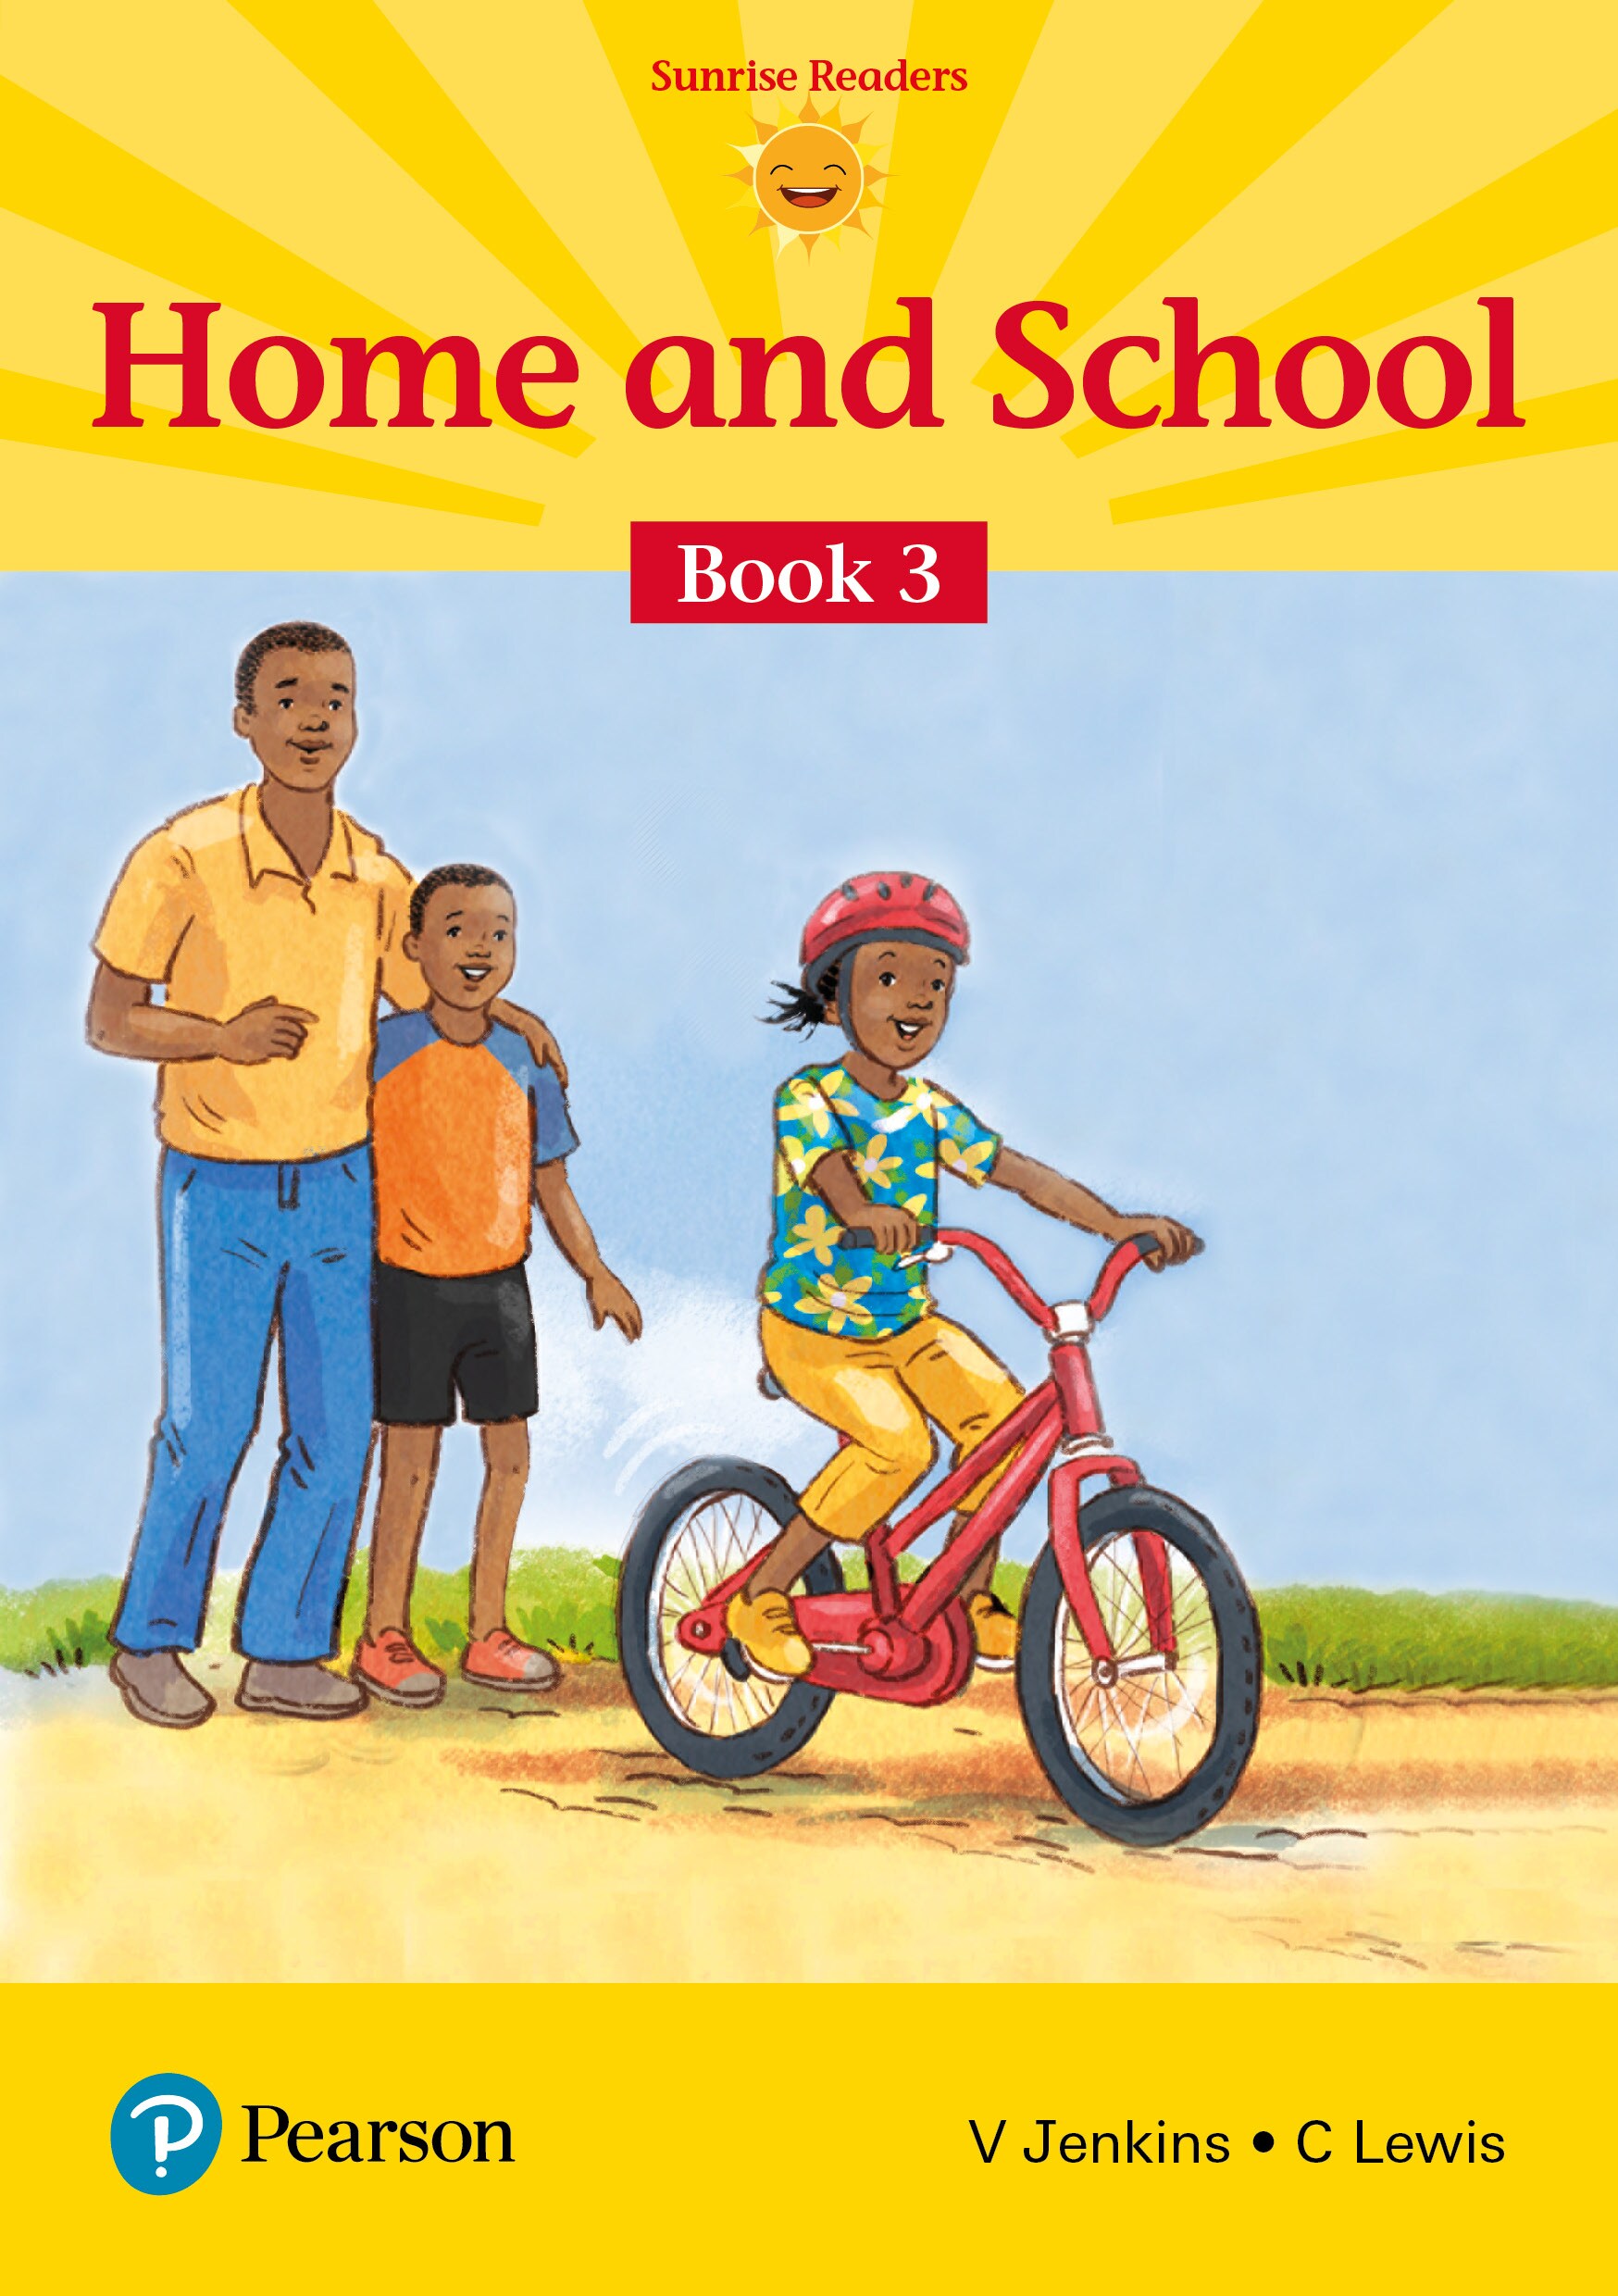 Home and School Book 3